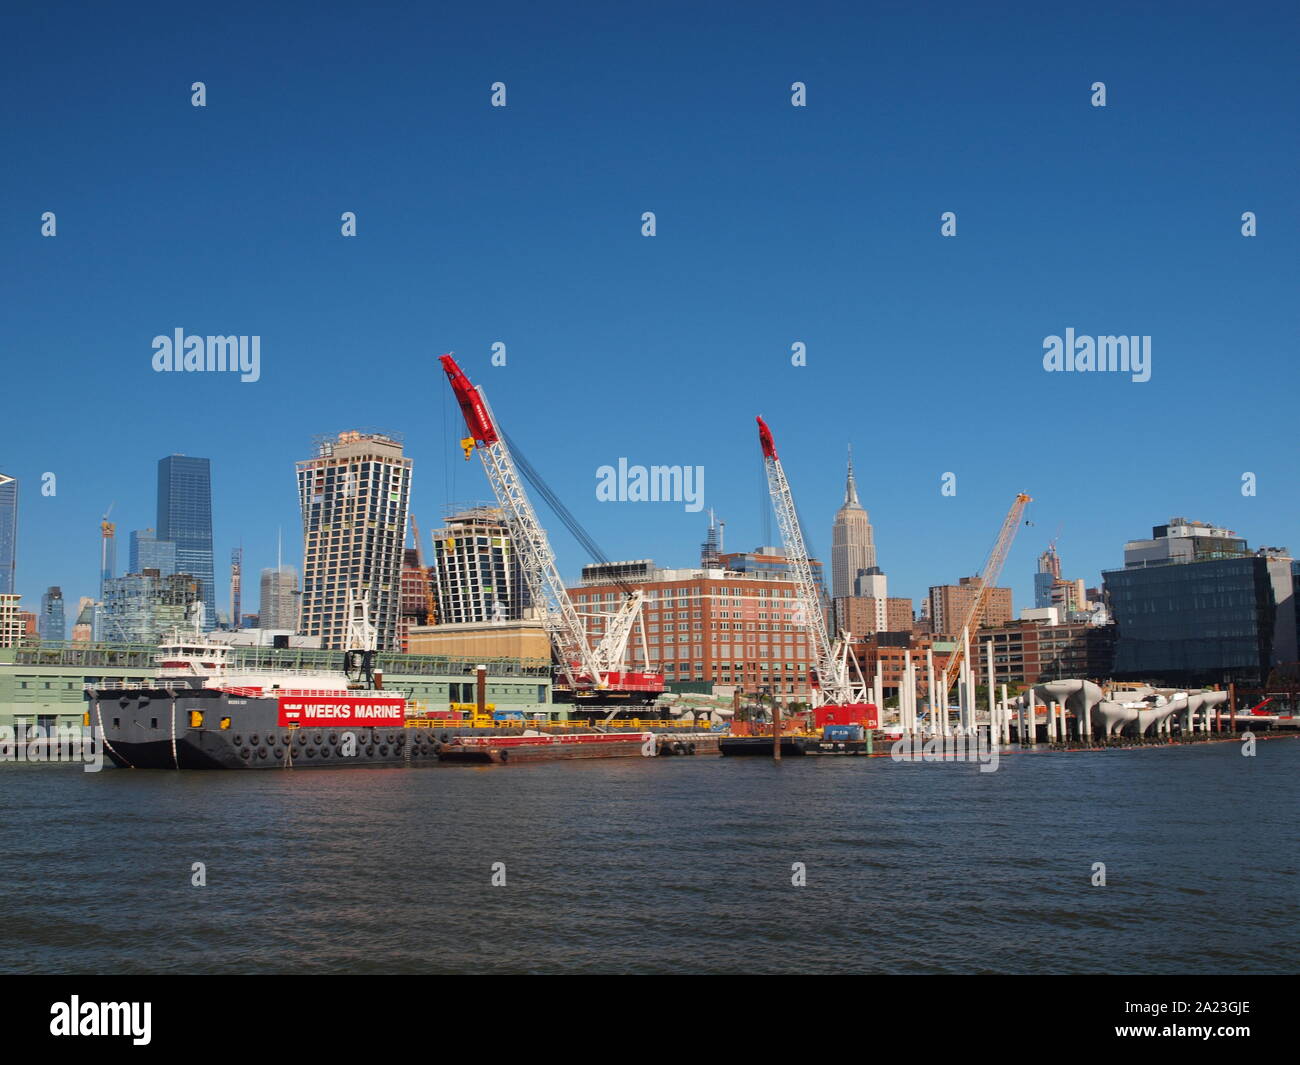 New Yok harbor and piers on the Manhattan shoreline with large construction ship and cranes Stock Photo